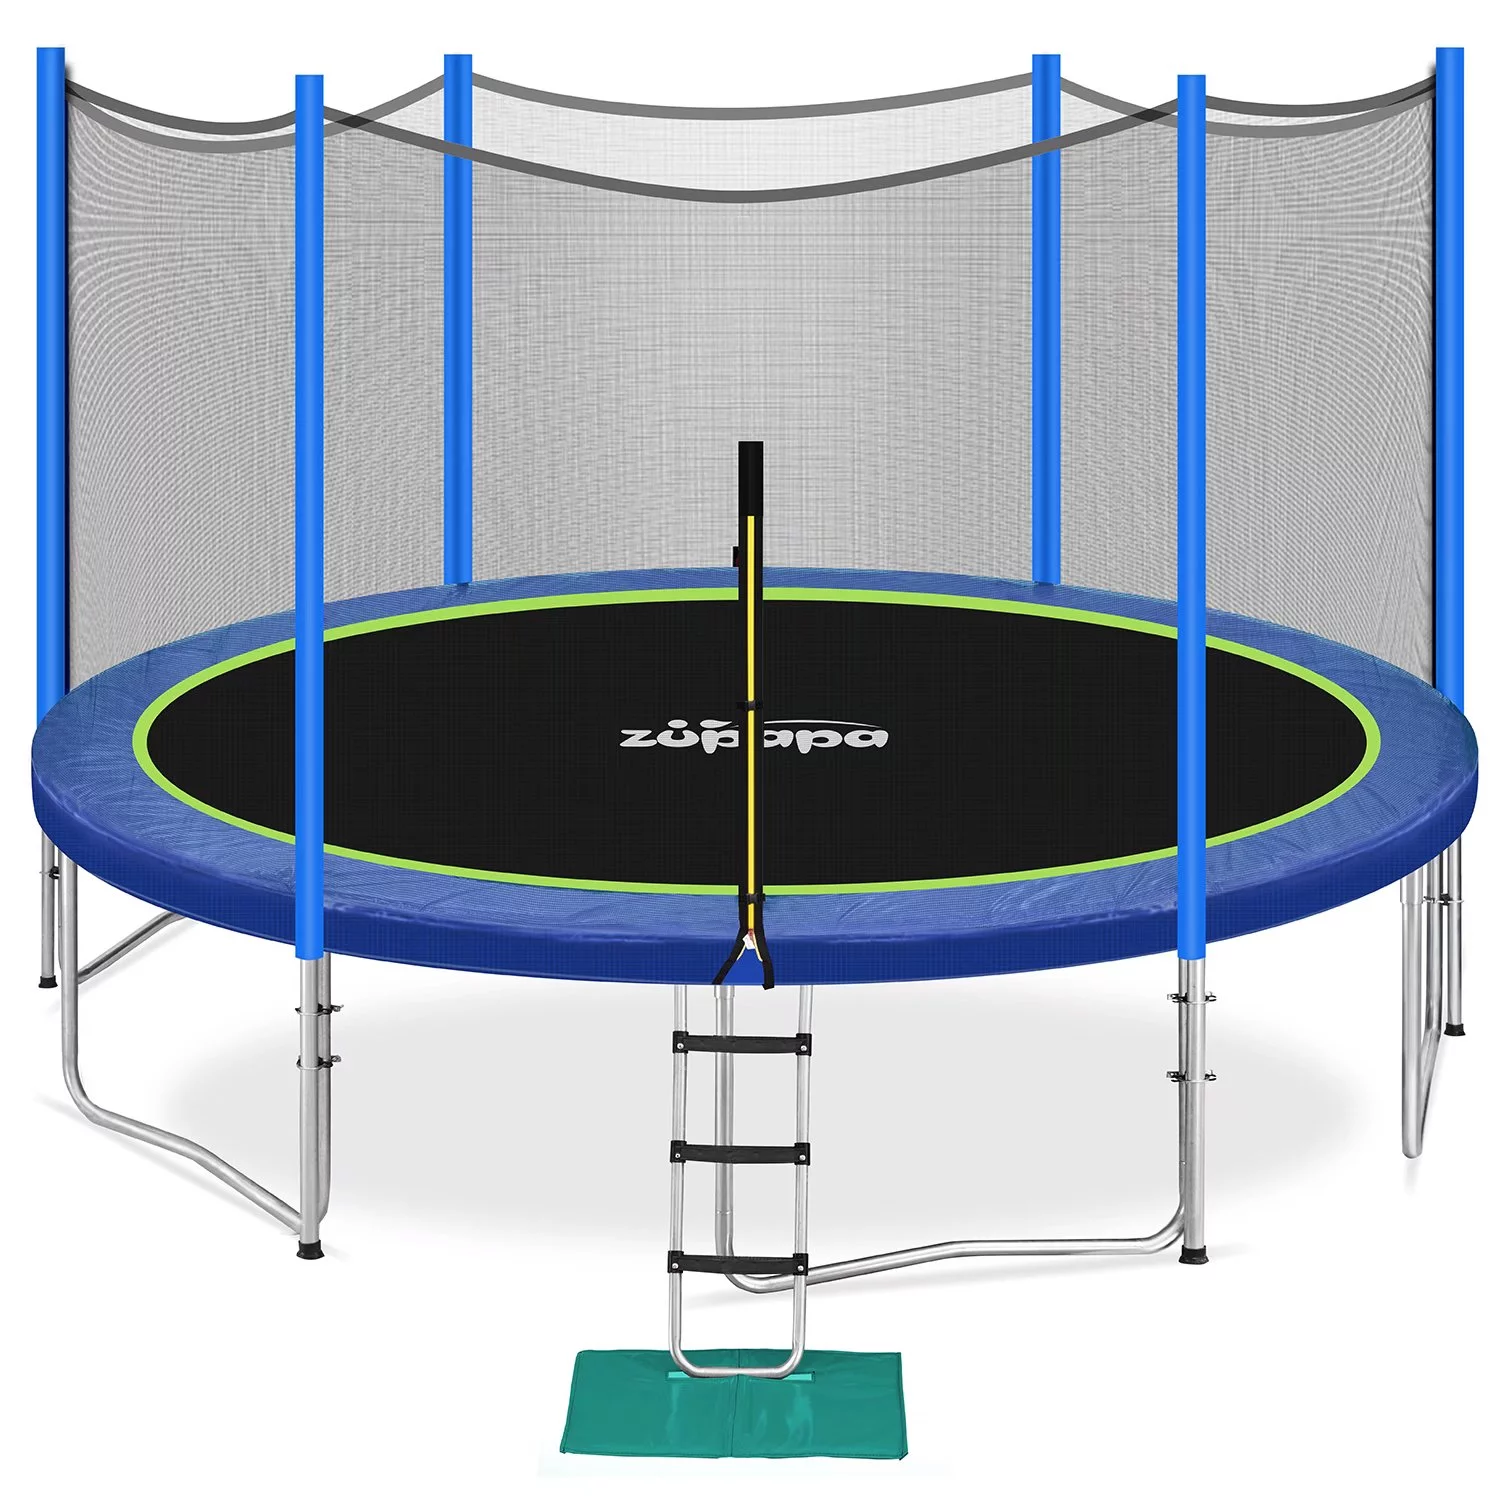 Zupapa 14FT Kids Trampoline,TUV Approved Backyard Trampoline with Enclosure net, Safety Pad Ladder Jumping Mat Rain Cover, 2019 Upgraded